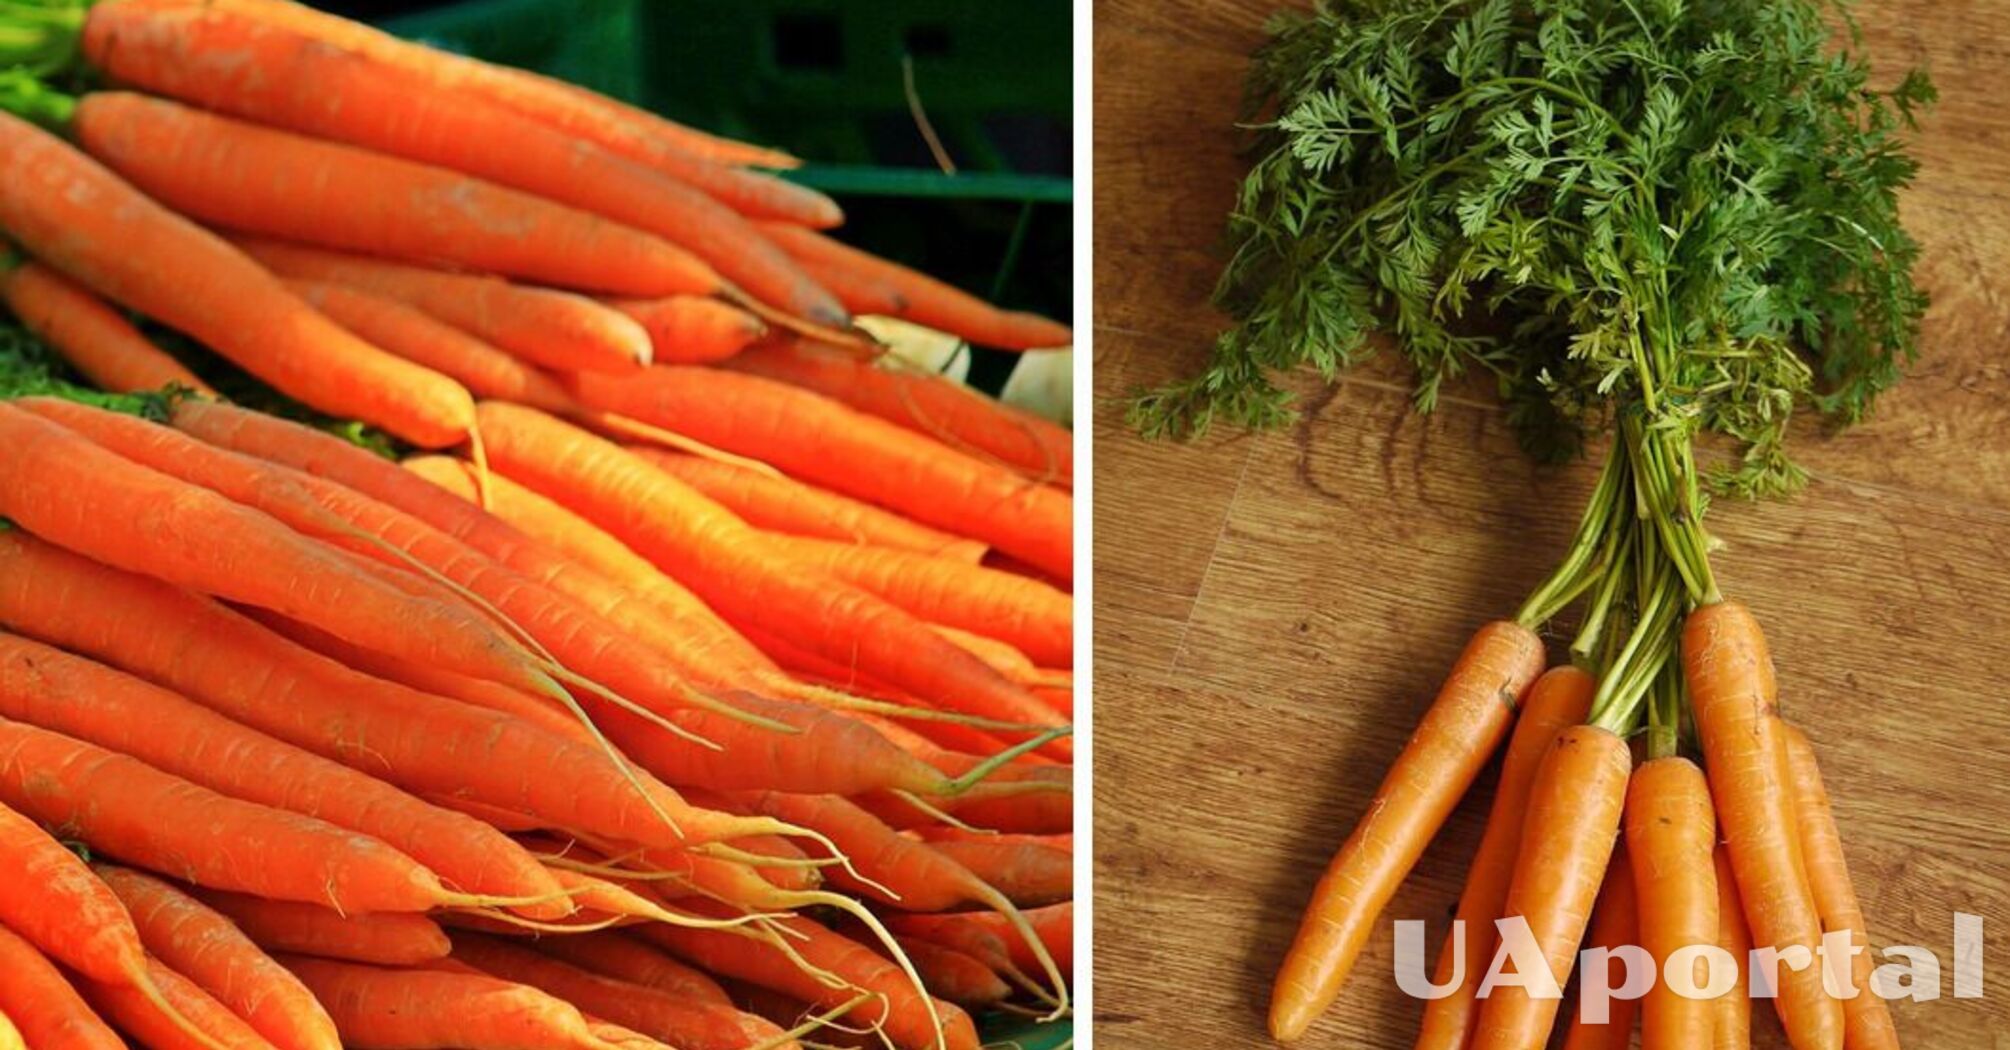 Experts explain why carrots should never be stored in the vegetable drawer of the refrigerator